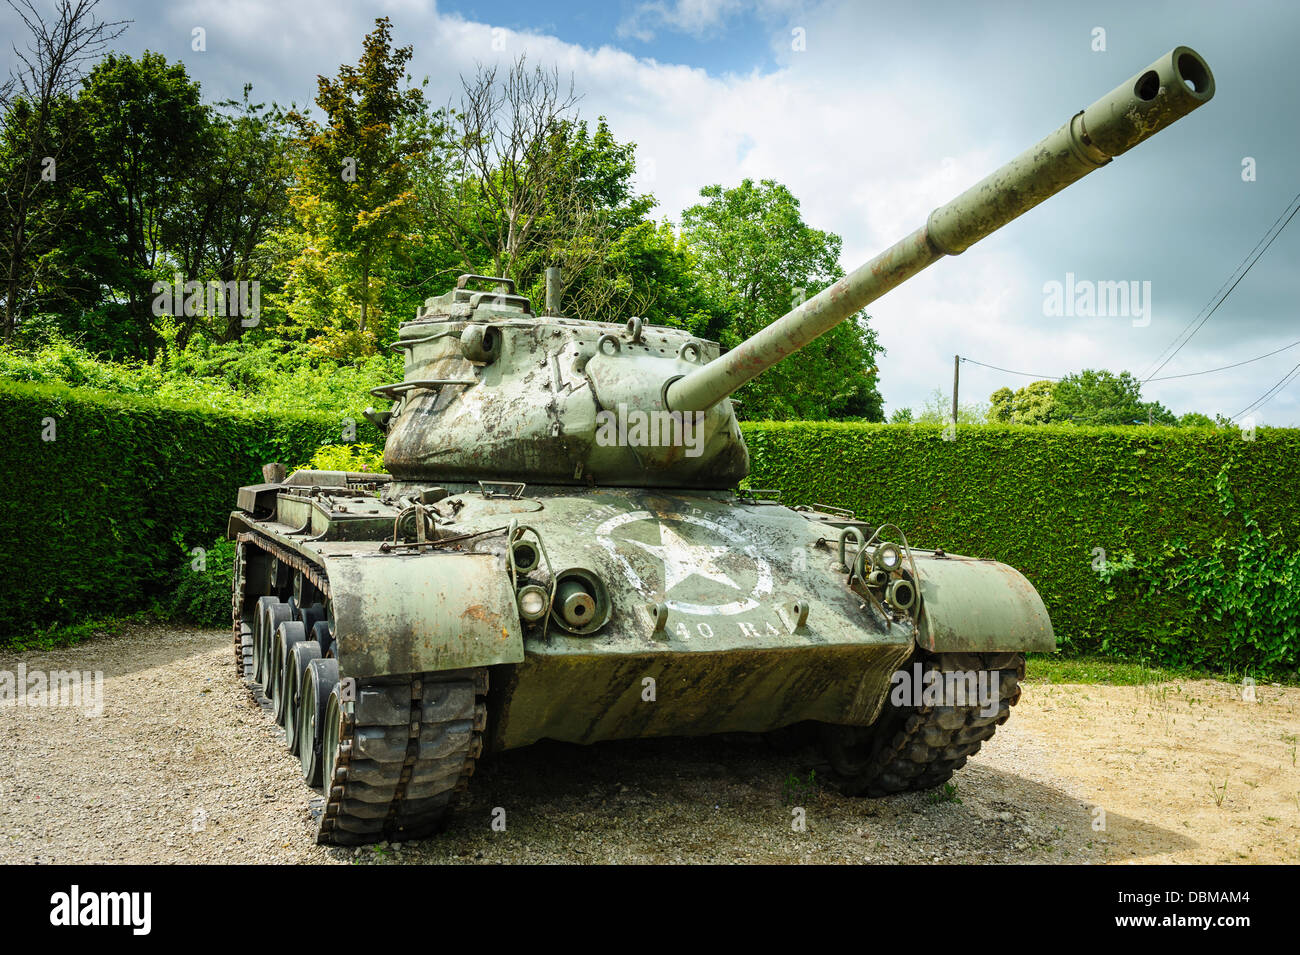 An old American tank from WW11 at Valmy, Marne, France Stock Photo